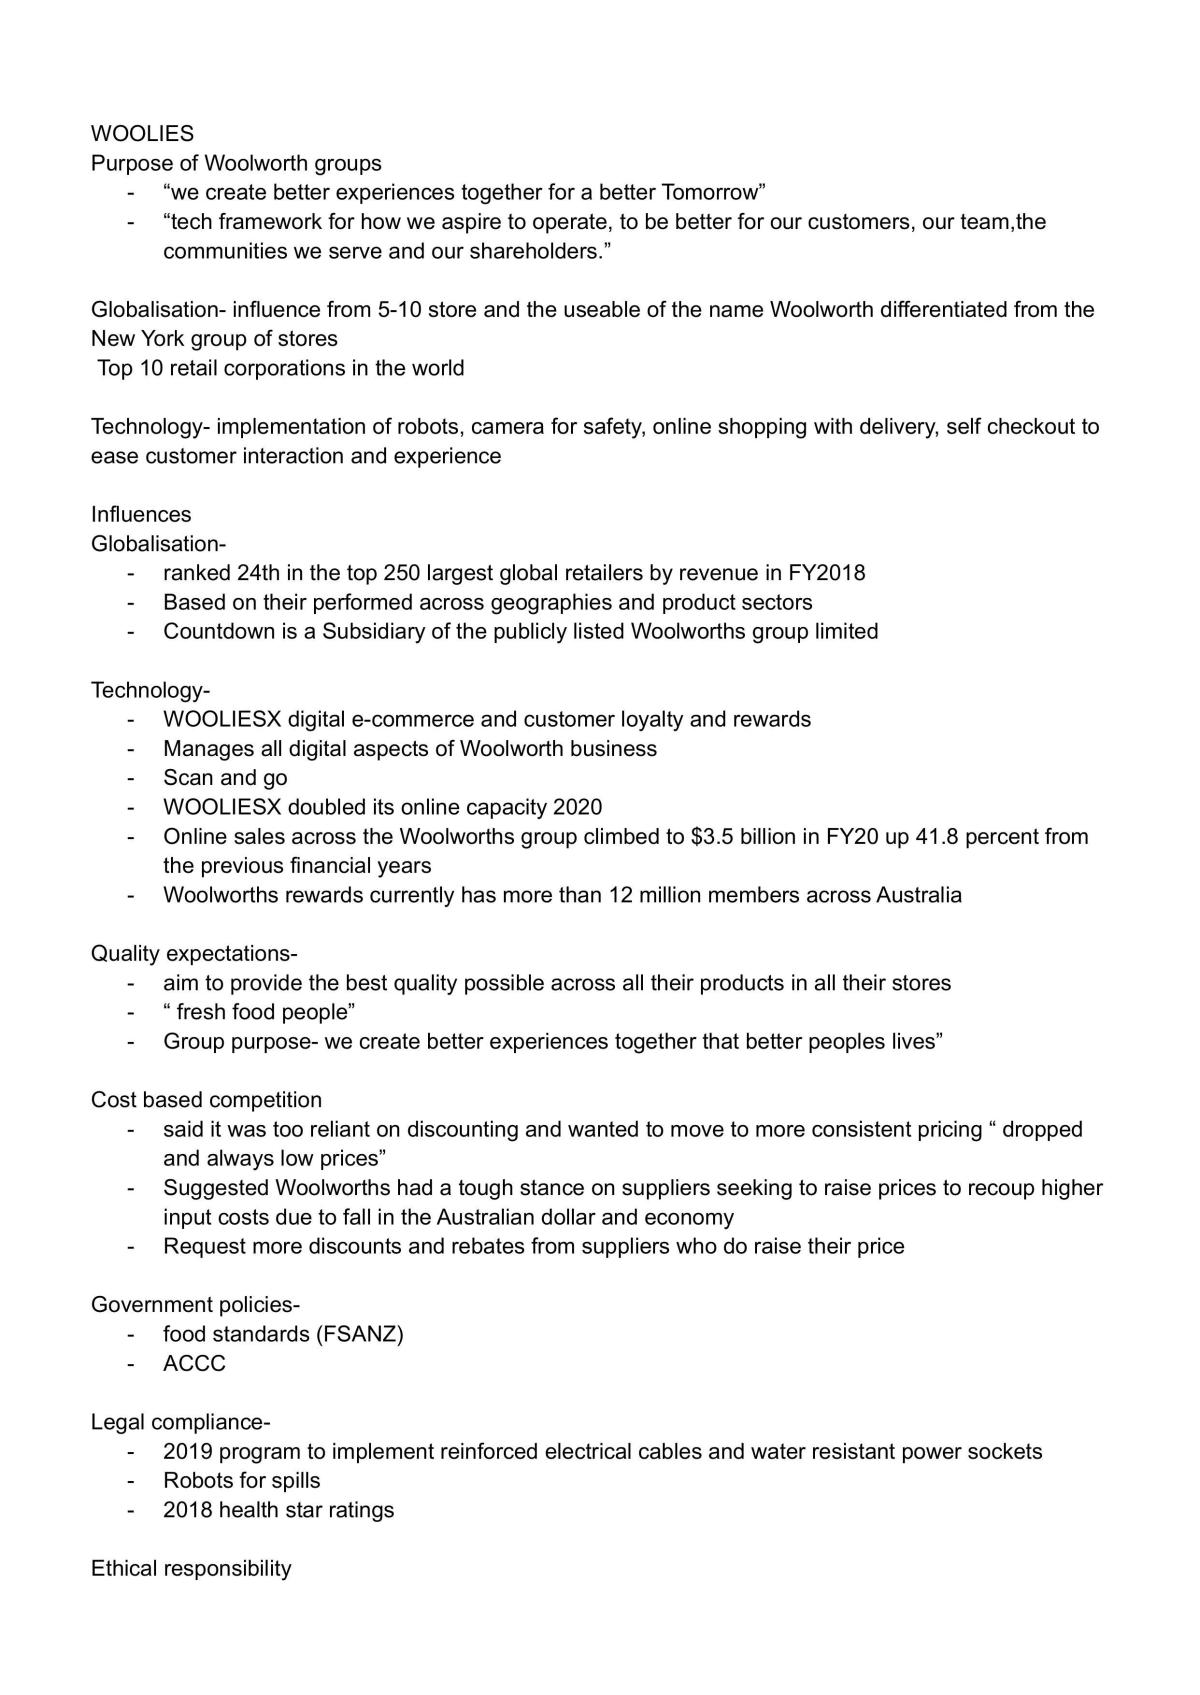 Woolies Case Study Notes - Page 1